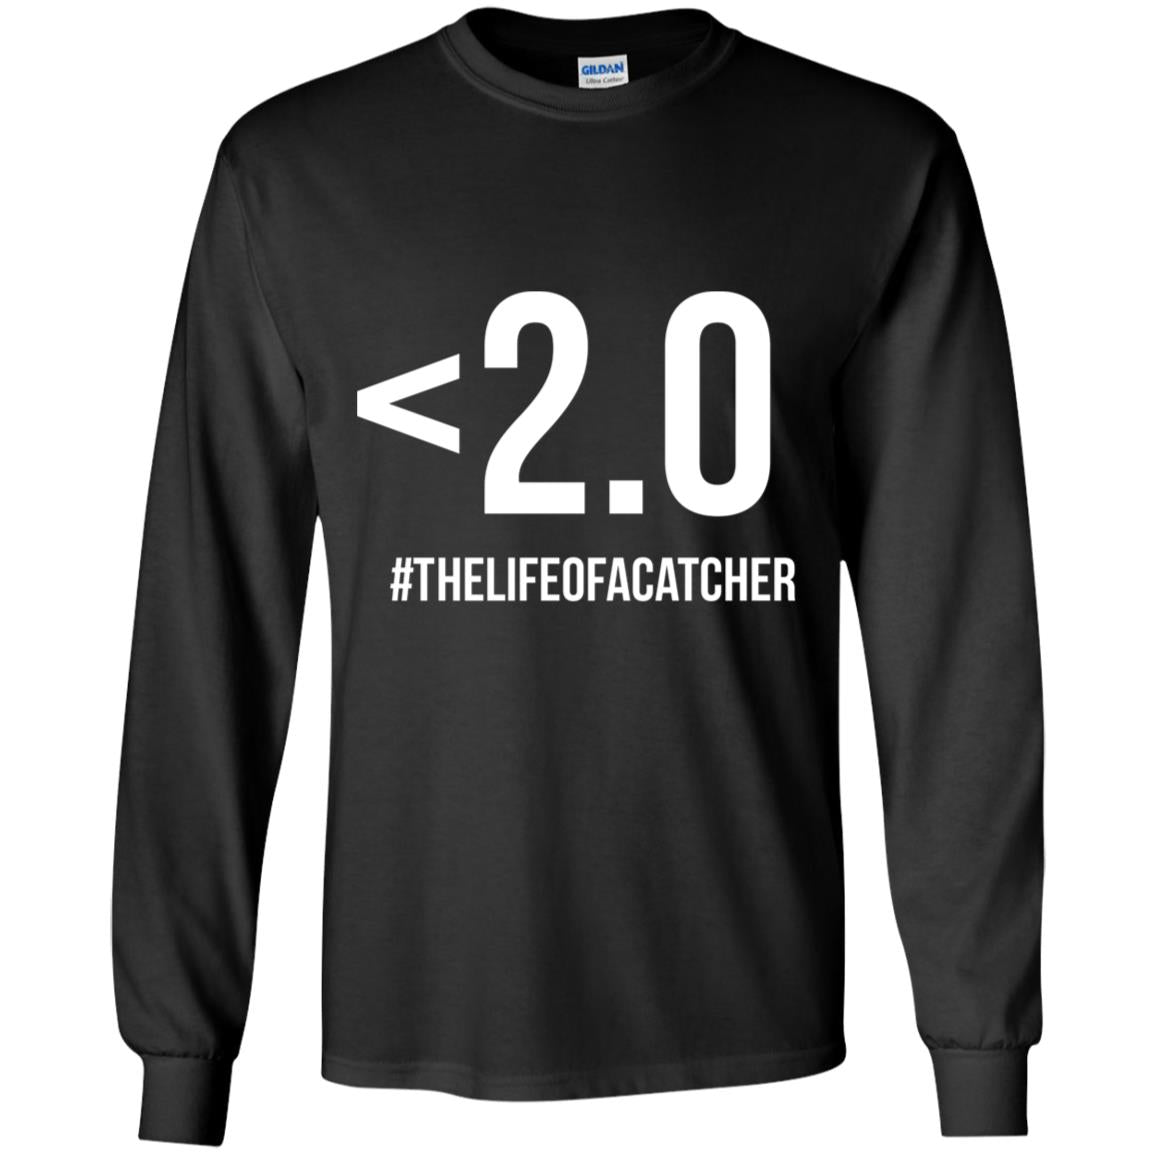 The Catching Guy Drop Your Pop < 2.0 Youth Long Sleeve Tee black